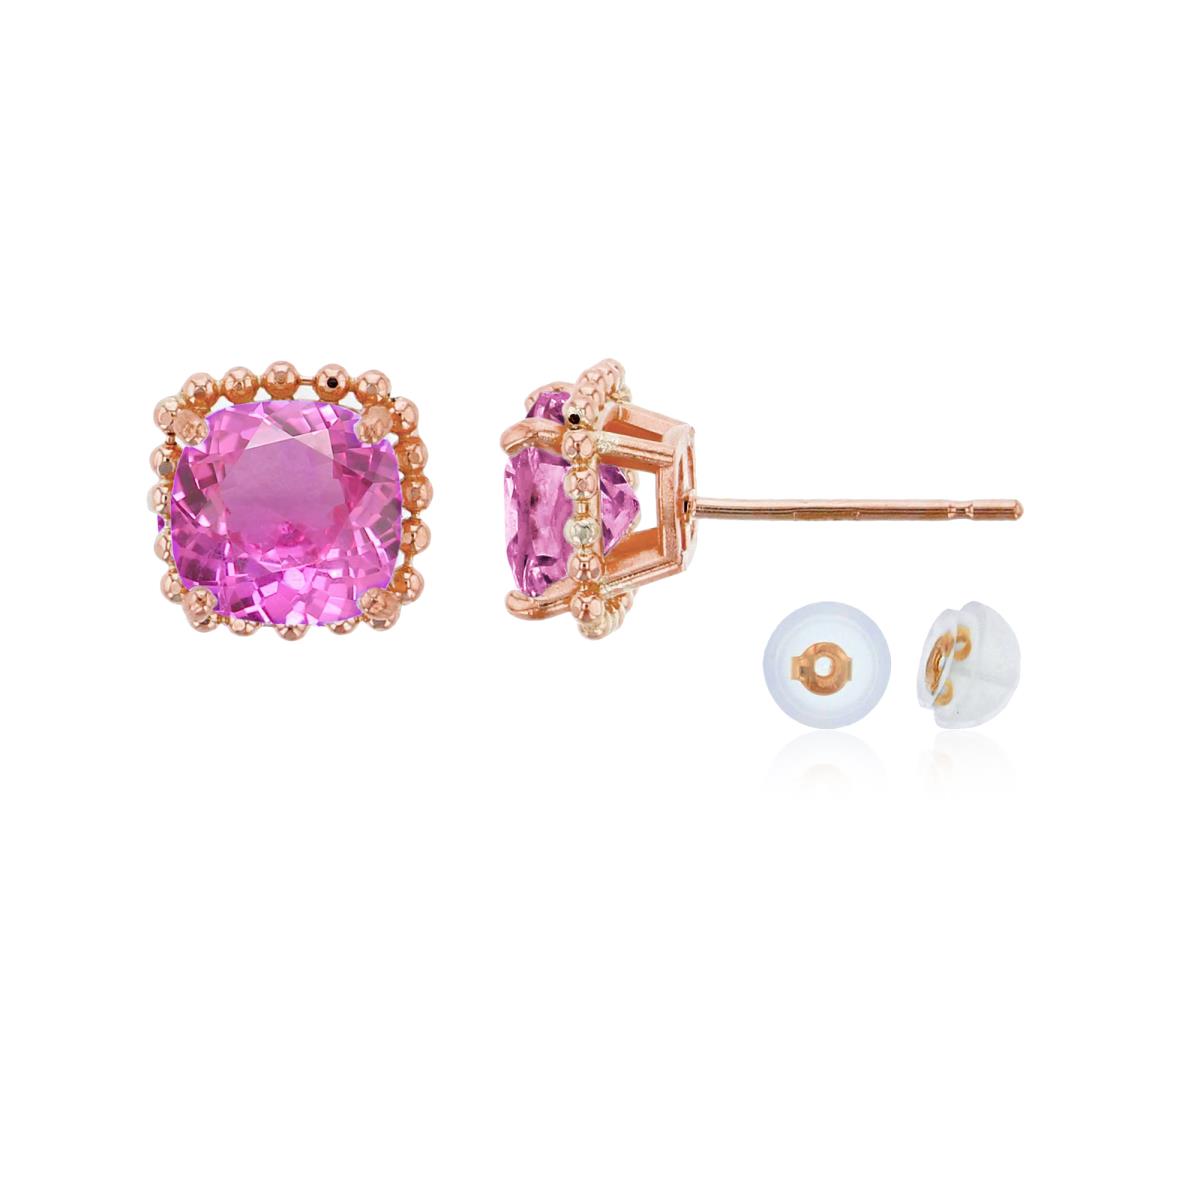 10K Rose Gold 6x6mm Cushion Cut Created Pink Sapphire Bead Frame Stud Earring with Silicone Back